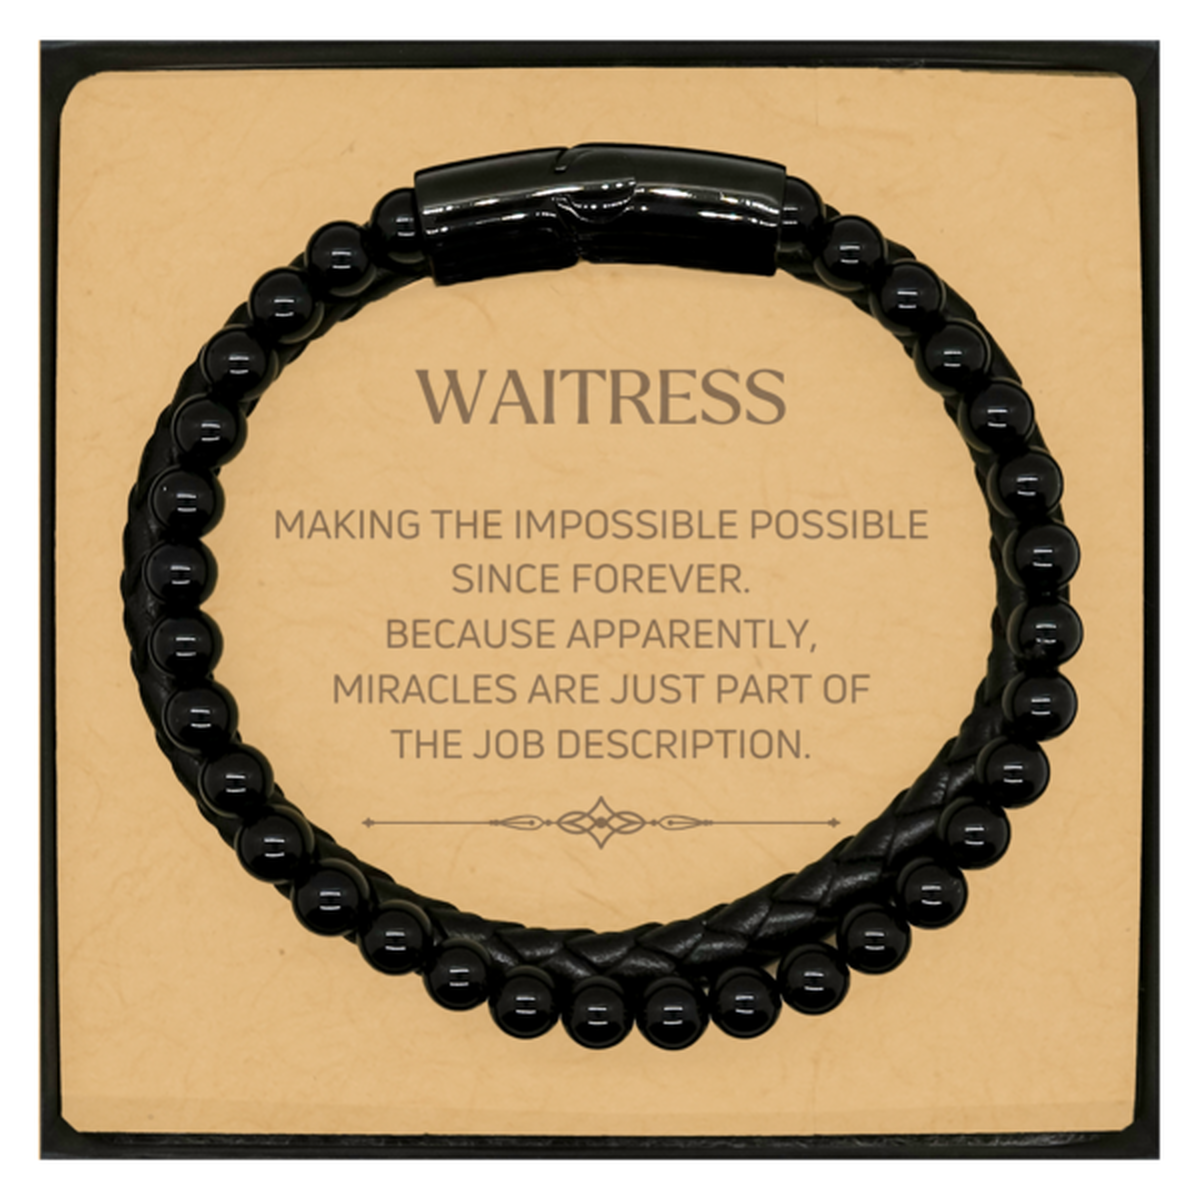 Funny Waitress Gifts, Miracles are just part of the job description, Inspirational Birthday Christmas Stone Leather Bracelets For Waitress, Men, Women, Coworkers, Friends, Boss